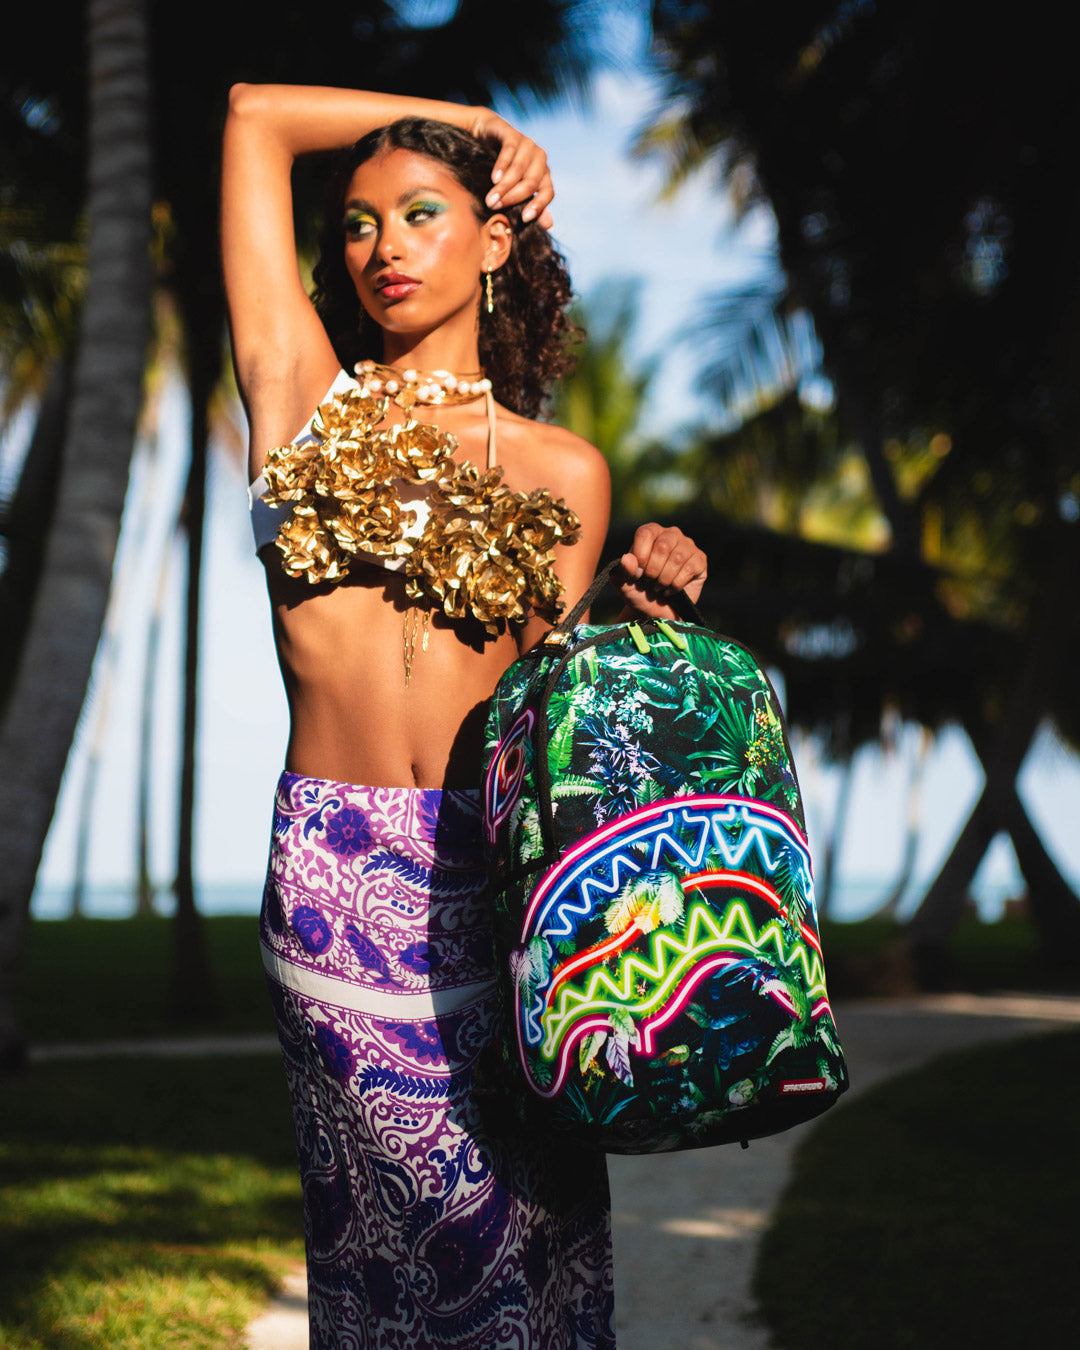 NEON FOREST BACKPACK